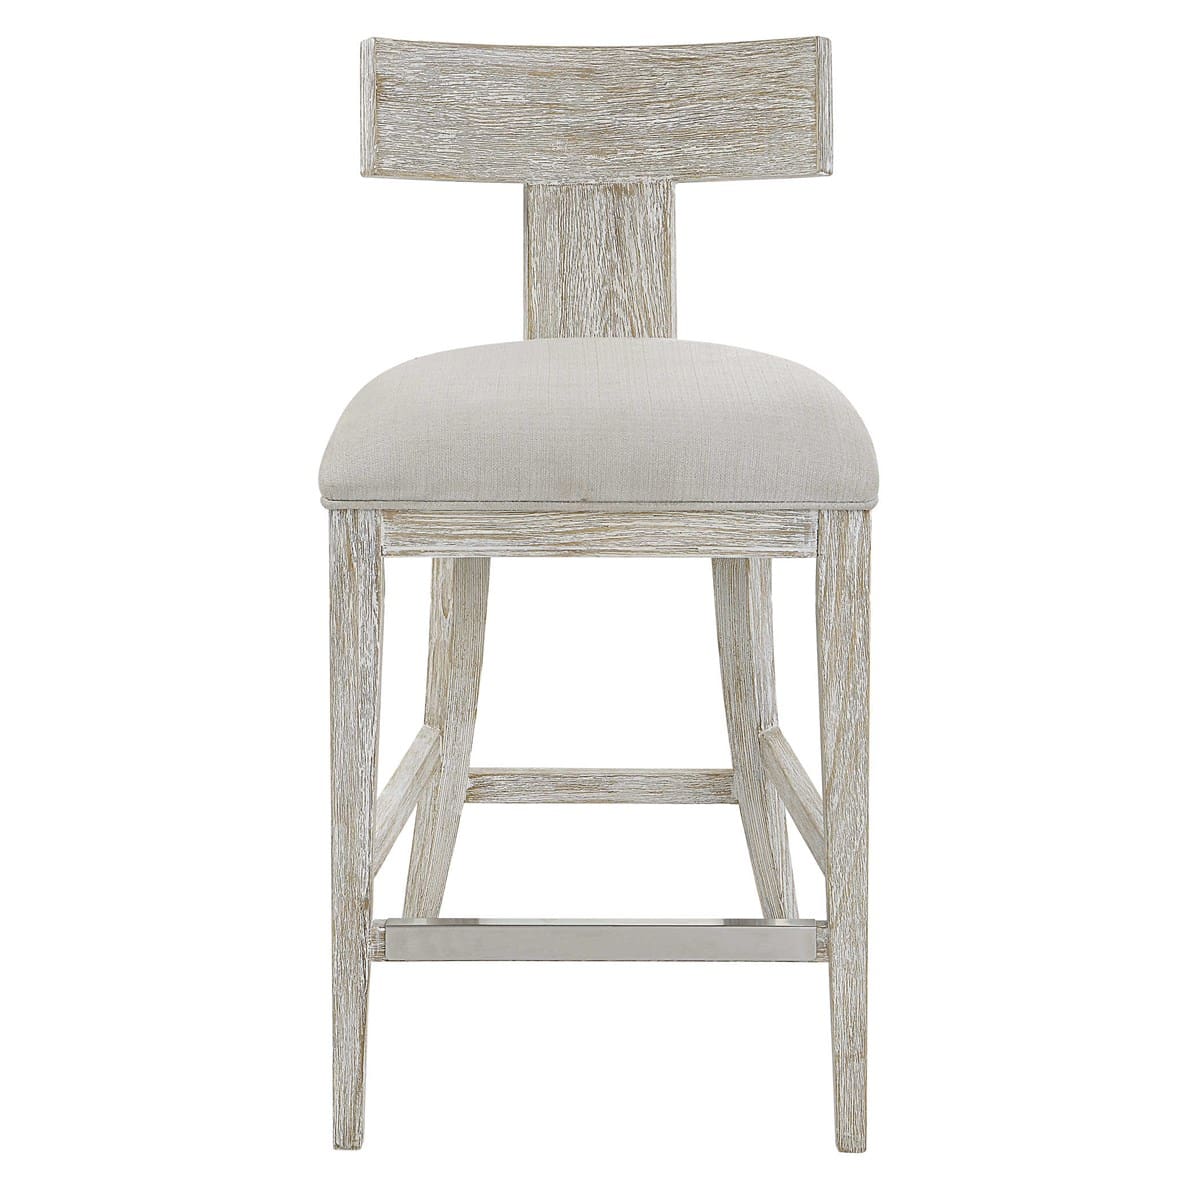 The iris counter stool is a modern klismos chair with a cimple curved back and a neutral, pale color palette. Available at Charleston furniture store GDC Furniture